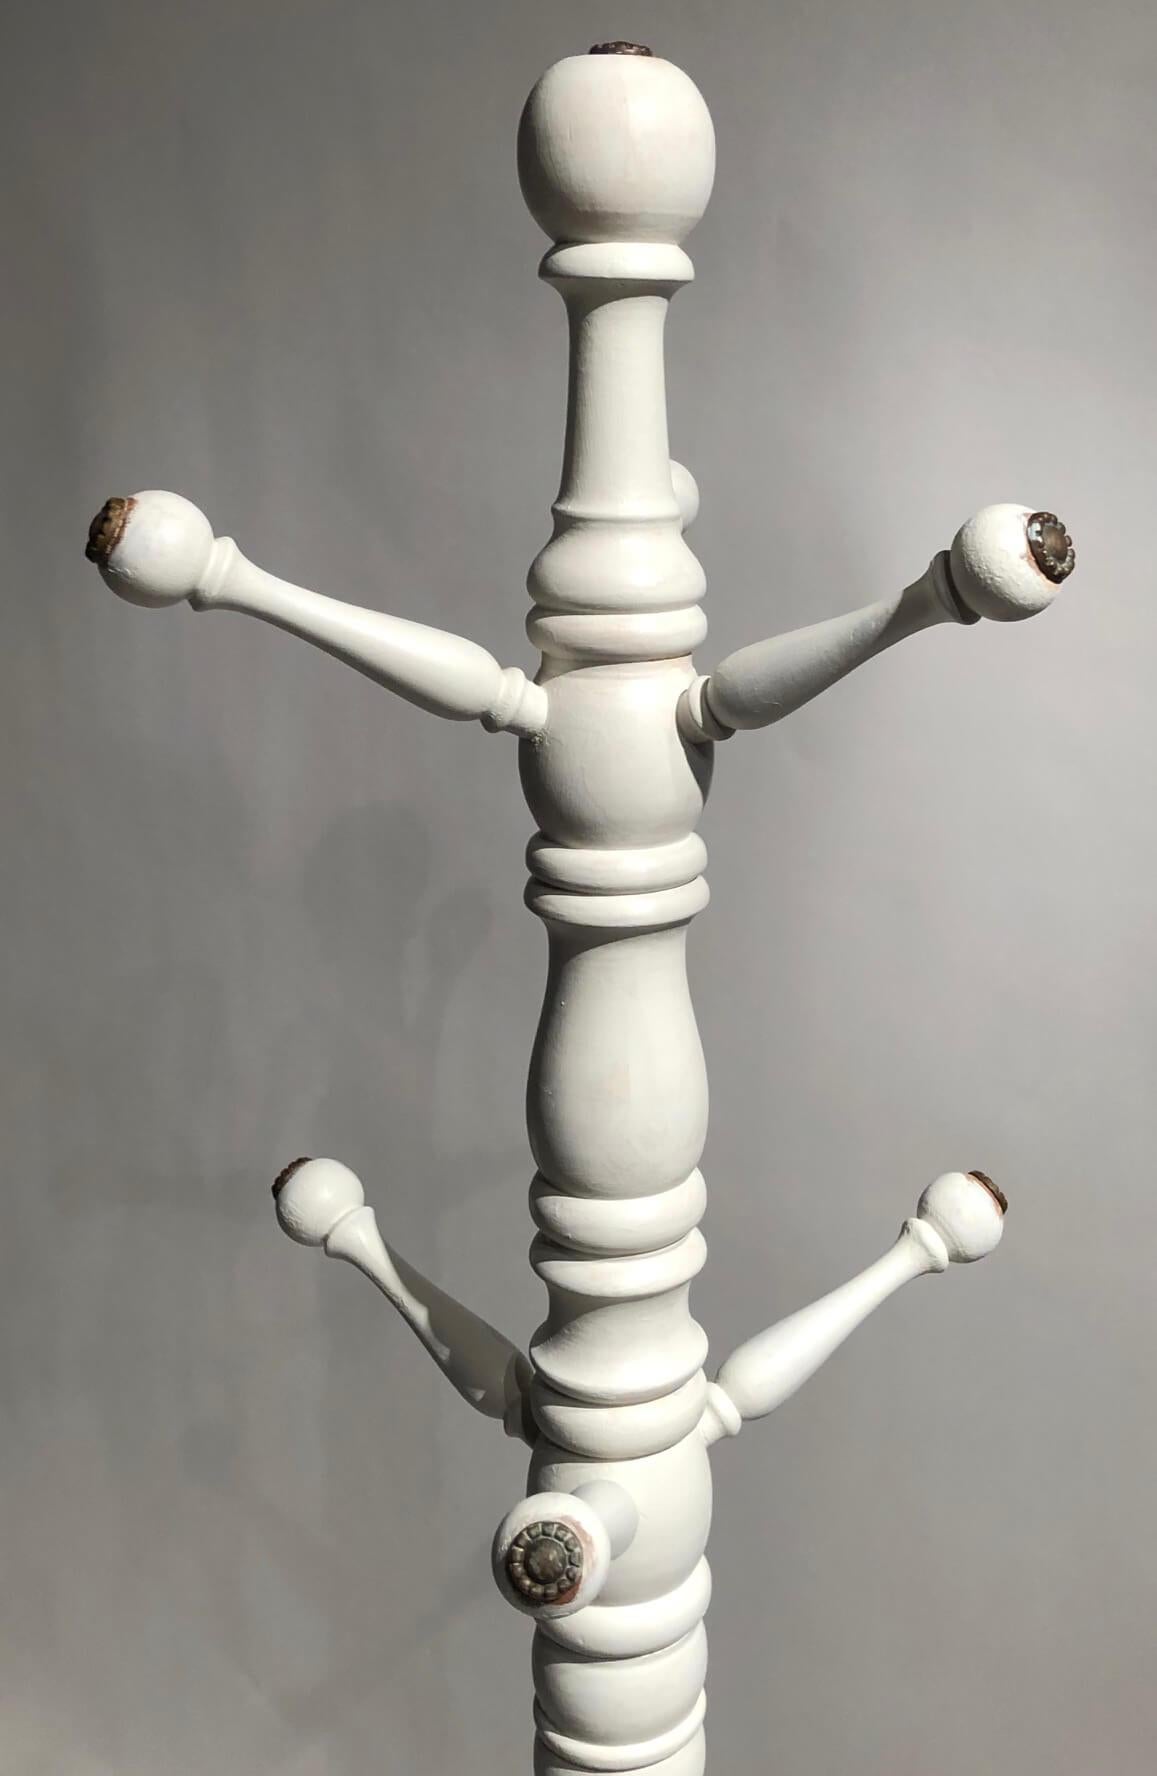 Last quarter 19th century Scottish coat and hat rack, hall tree, or hall stand having painted and turned standard issuing six turned pegs with bead-stamped brass caps connecting to base with turned disk collar atop four carved deer leg and hoof